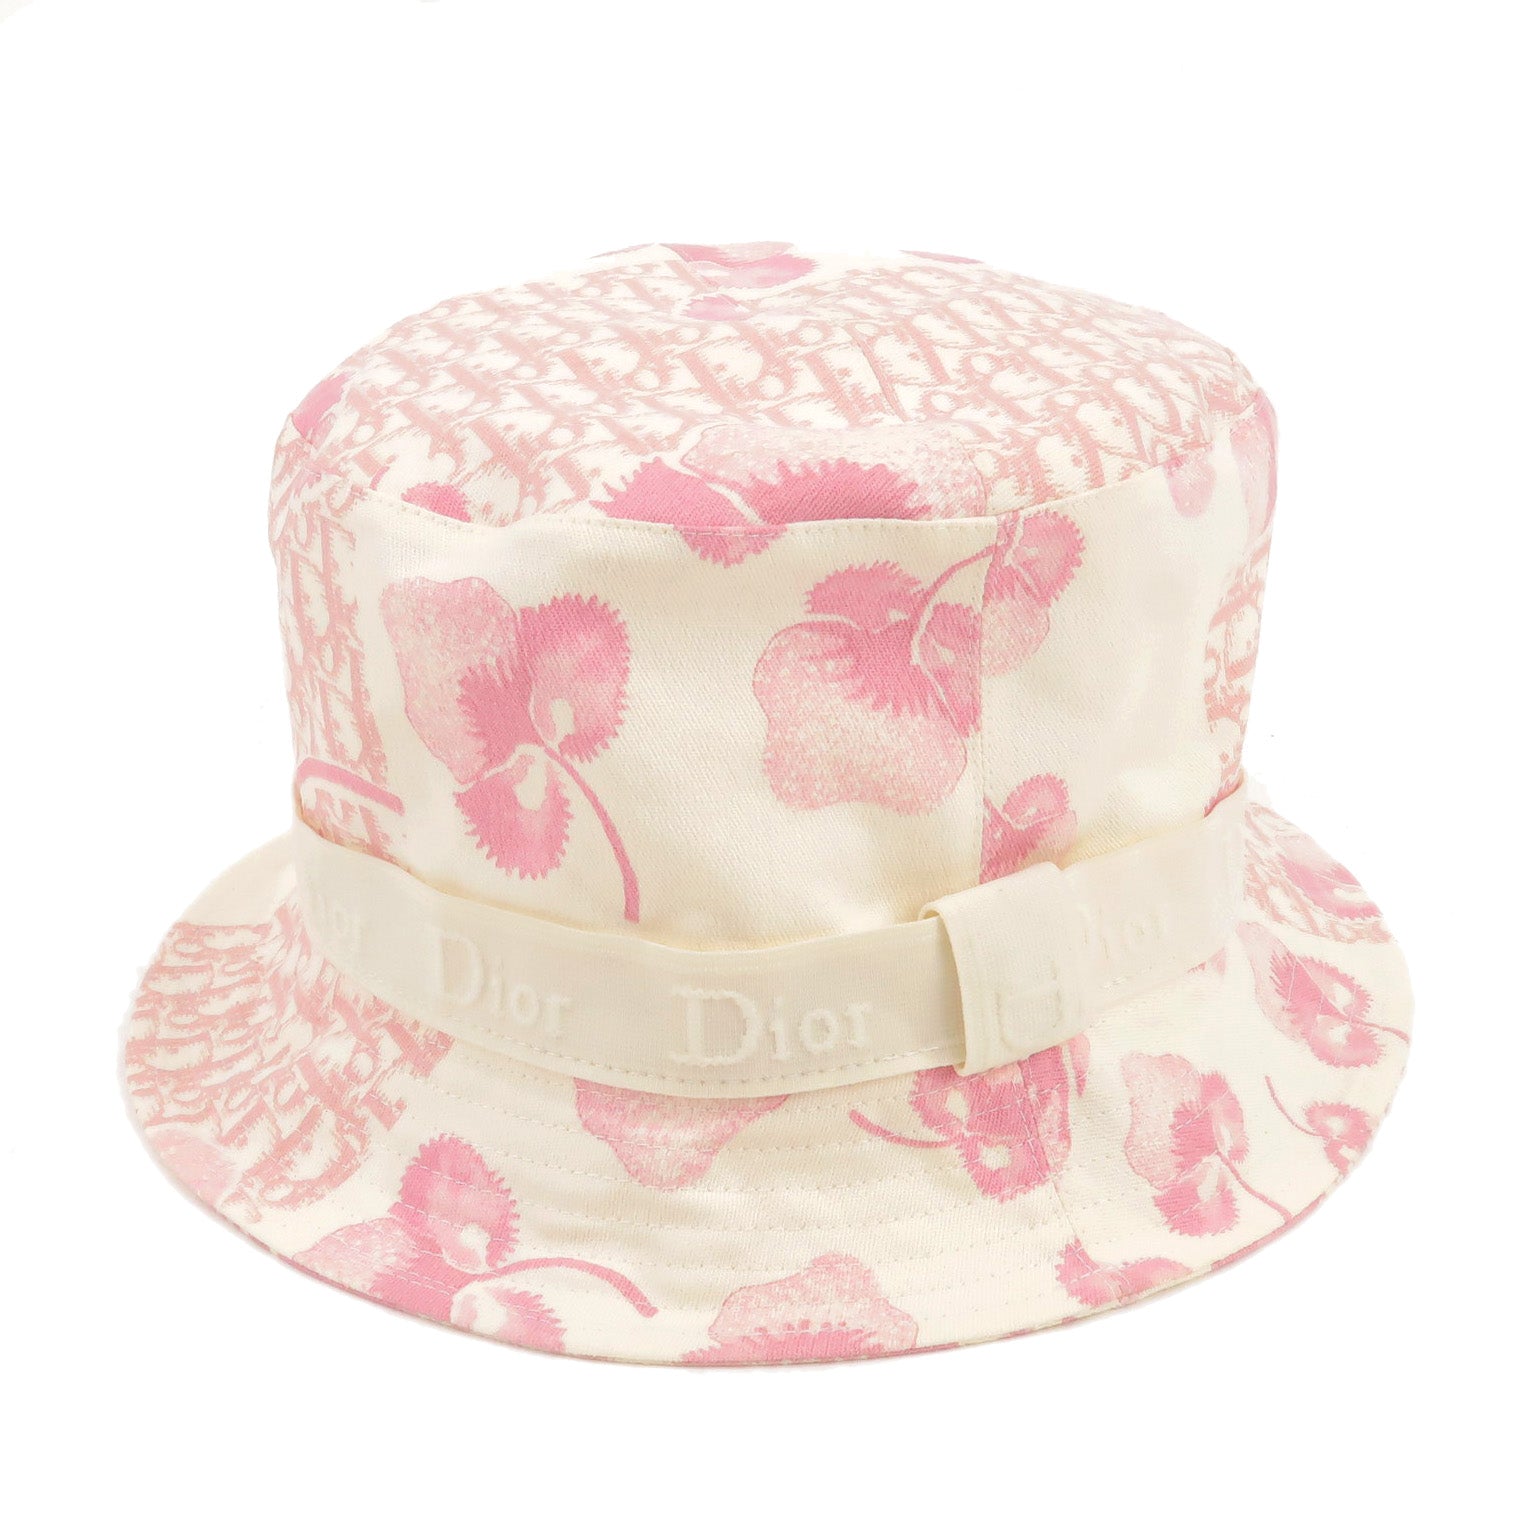 Christian-Dior-Trotter-Cotton-Bucket-Hat-Size-57-Pink-White